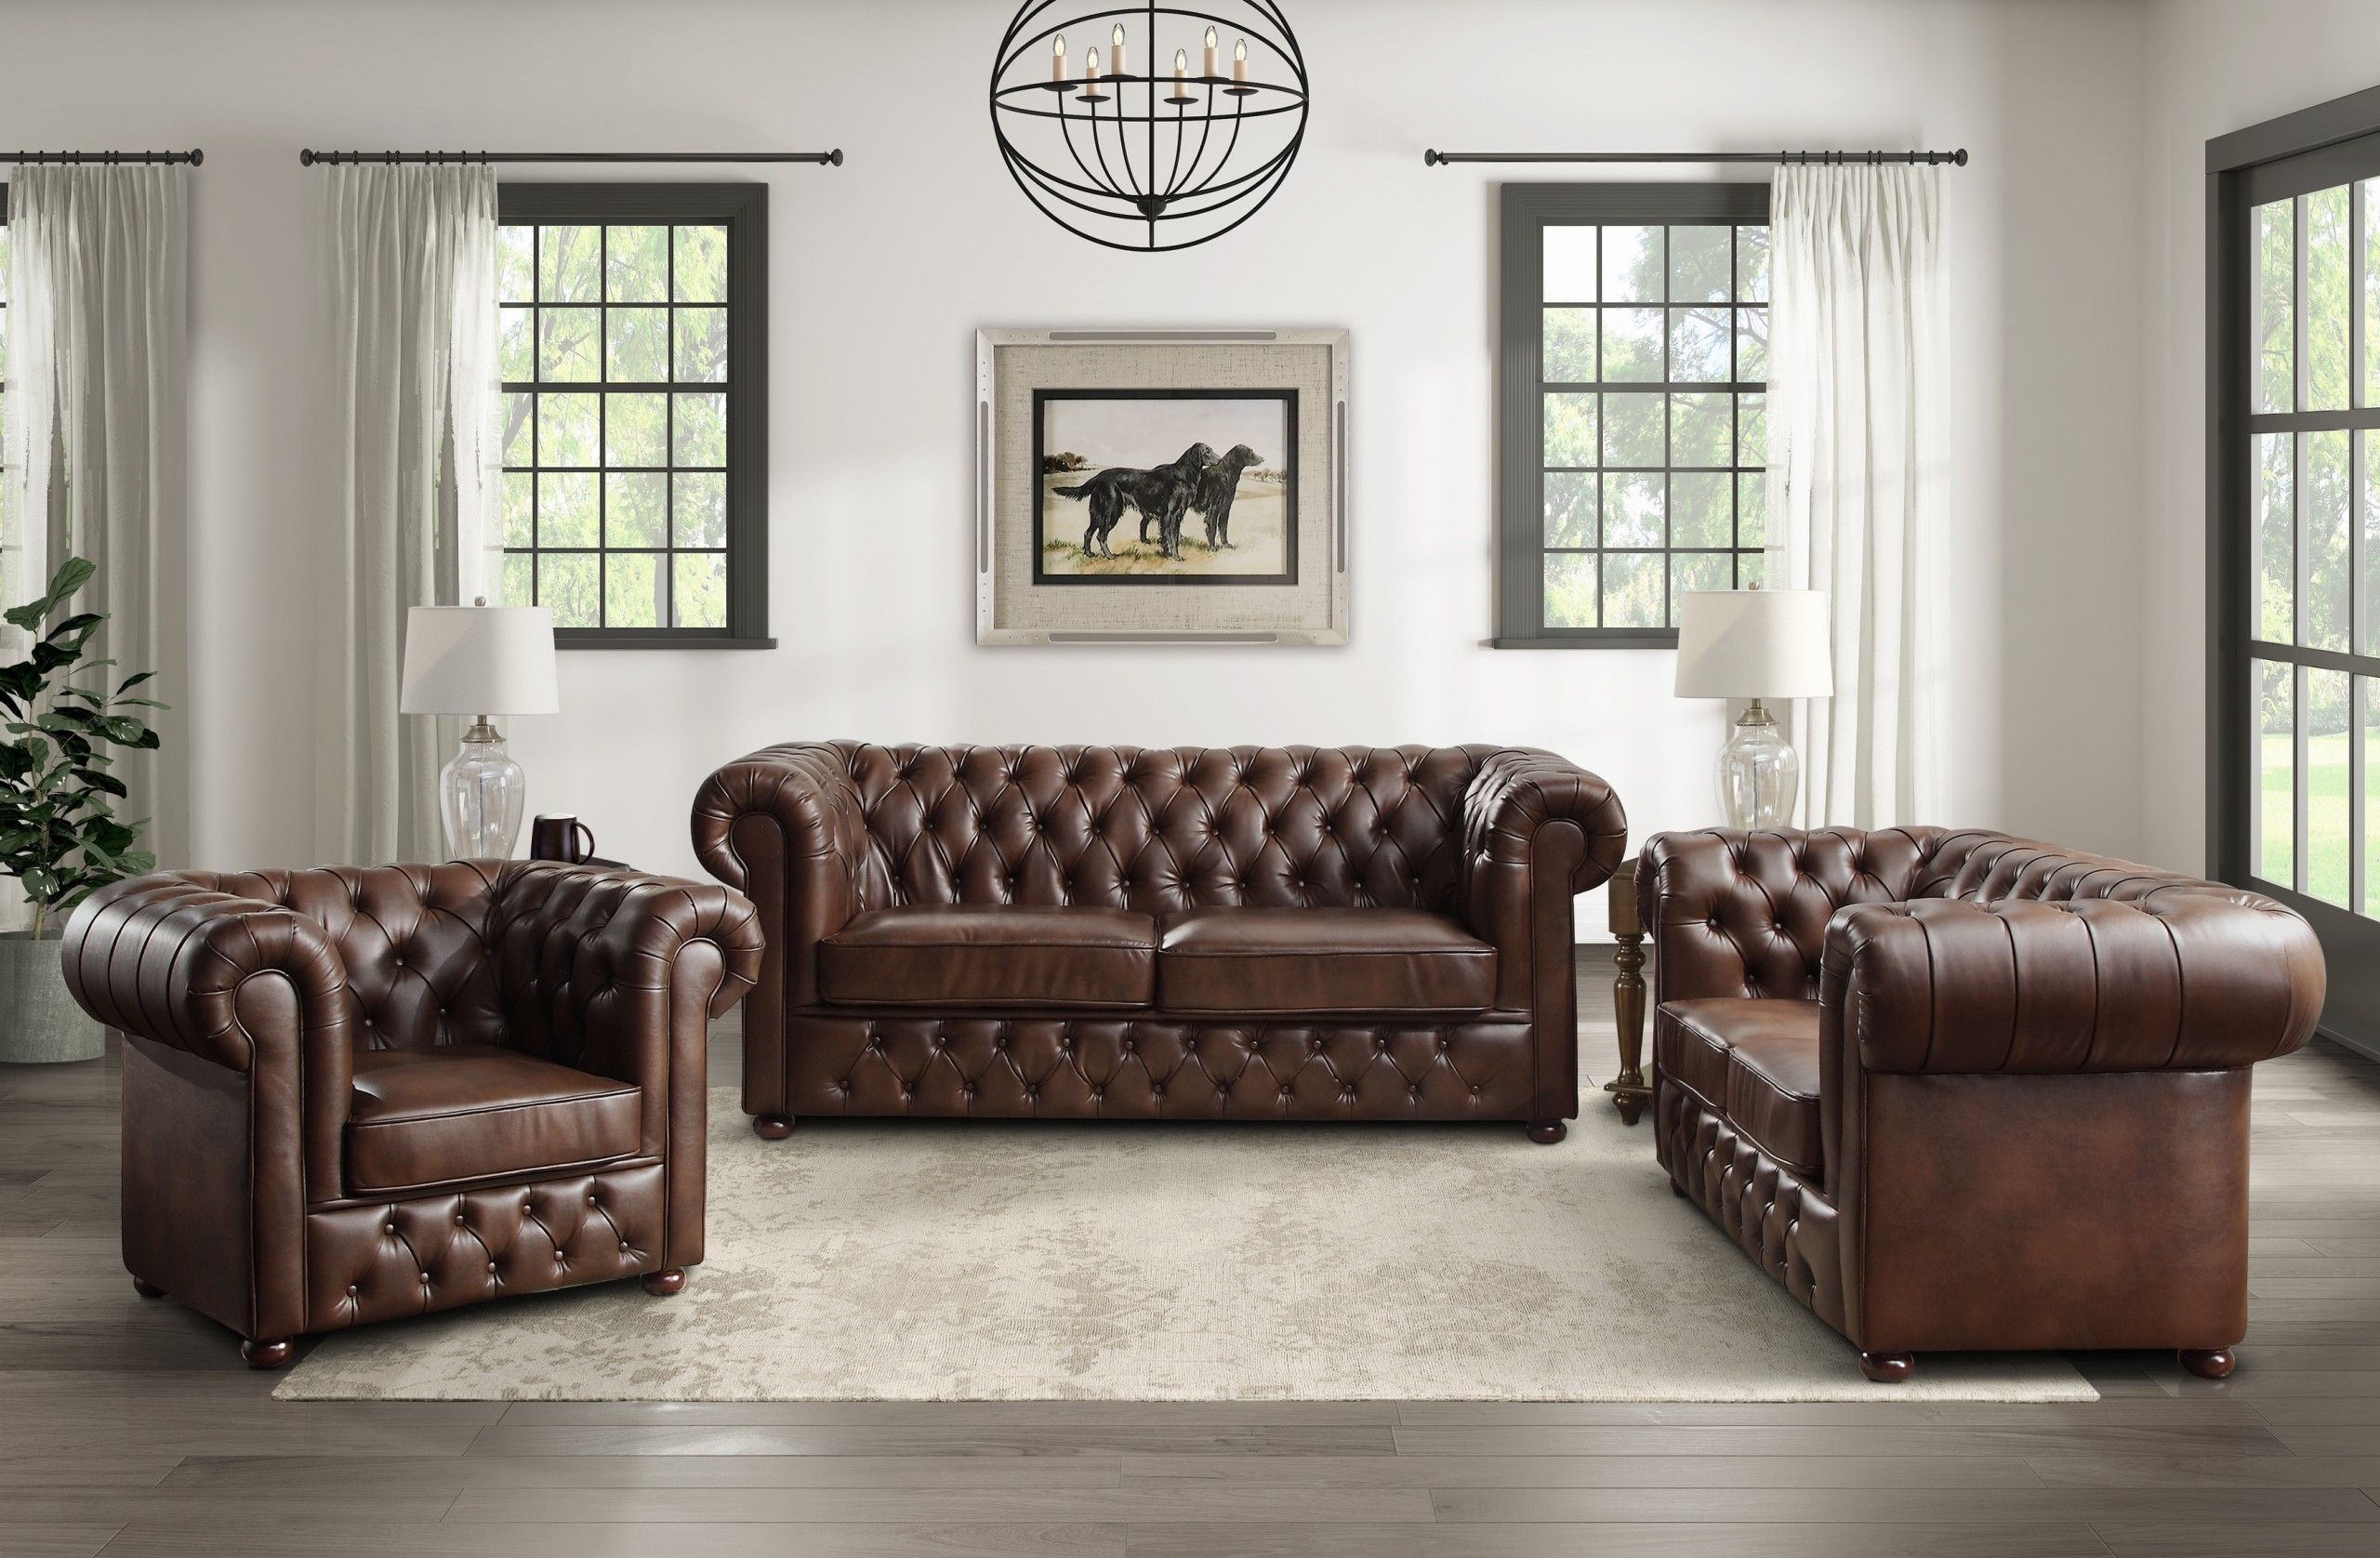 Faux Leather Chesterfield Sofa In Brown Finish – Oc Homestyle Furniture Pertaining To Faux Leather Sofas In Dark Brown (View 7 of 15)